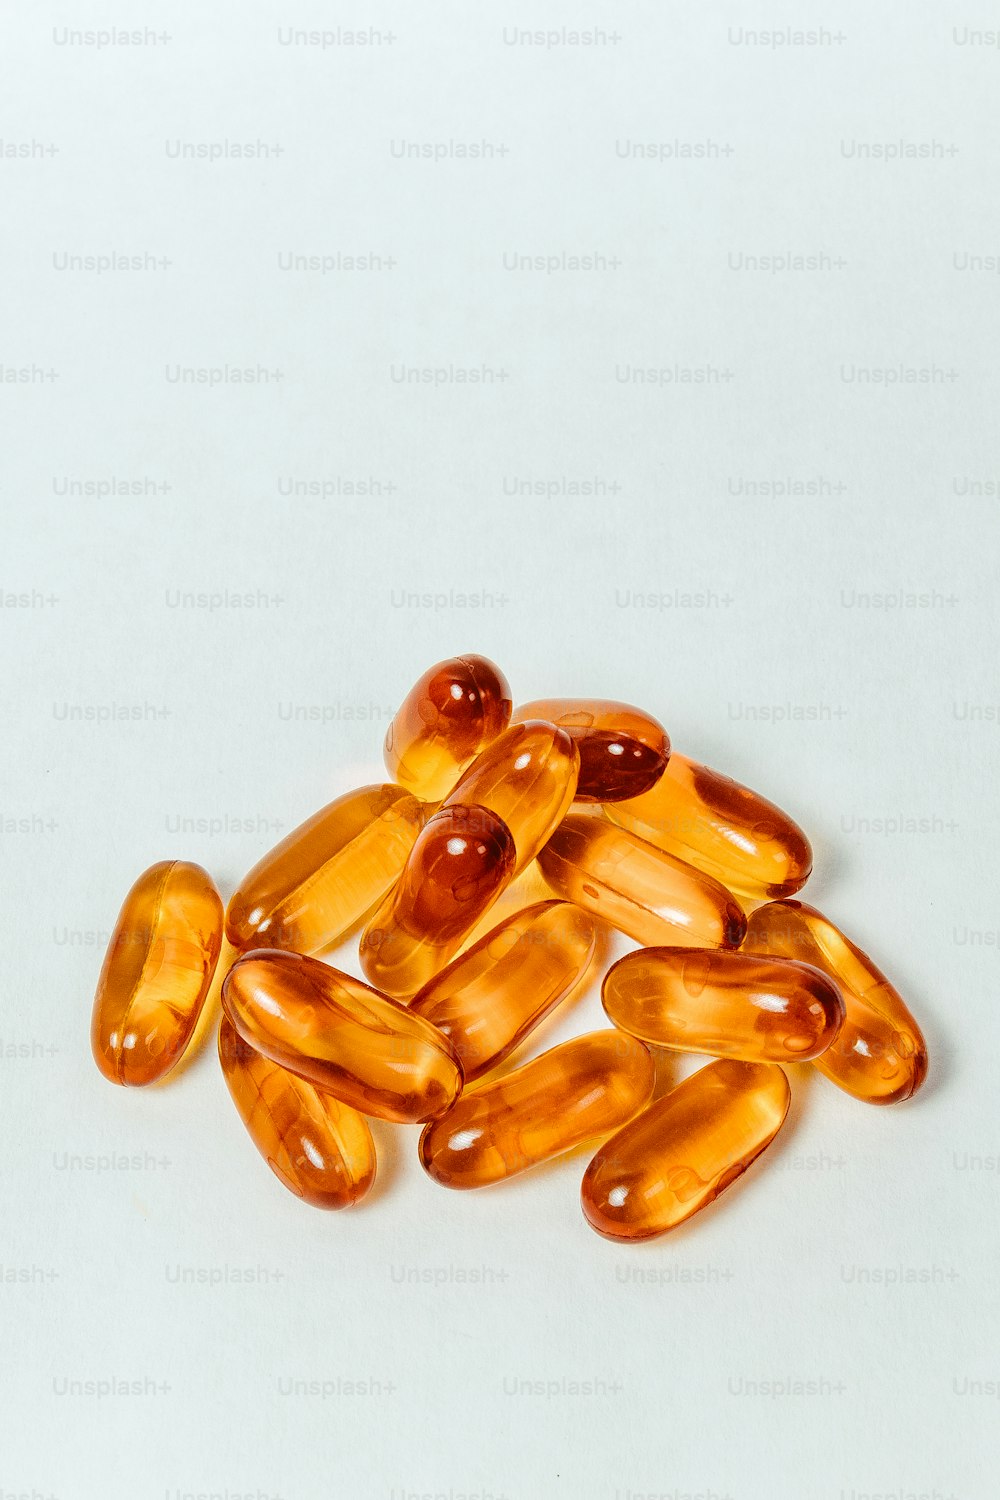 a pile of fish oil capsules on a white surface